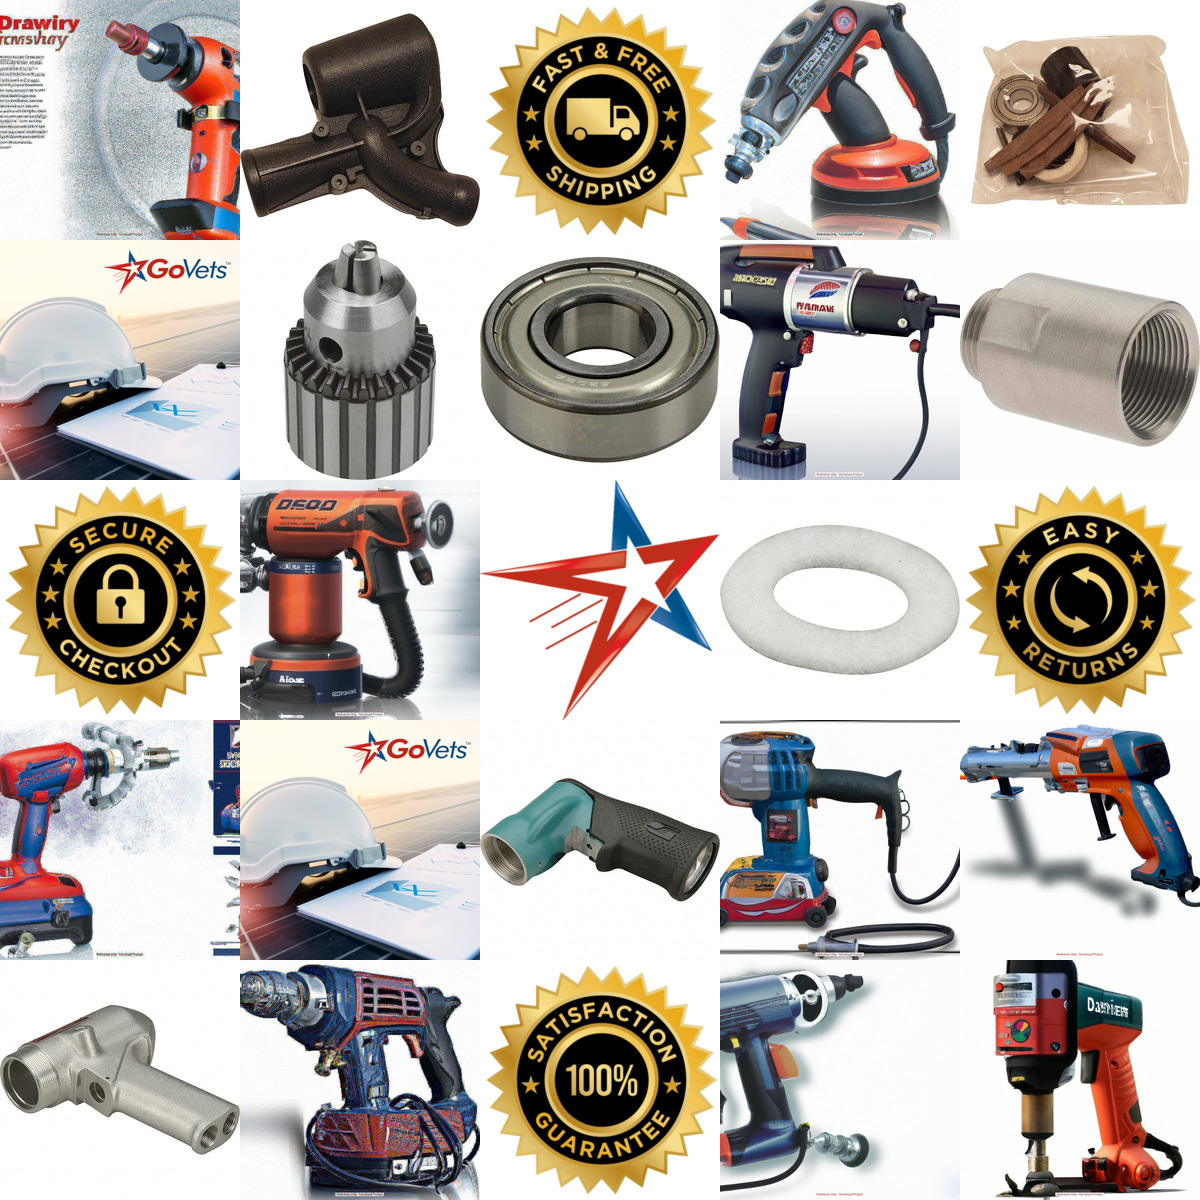 A selection of Power Drill Parts products on GoVets